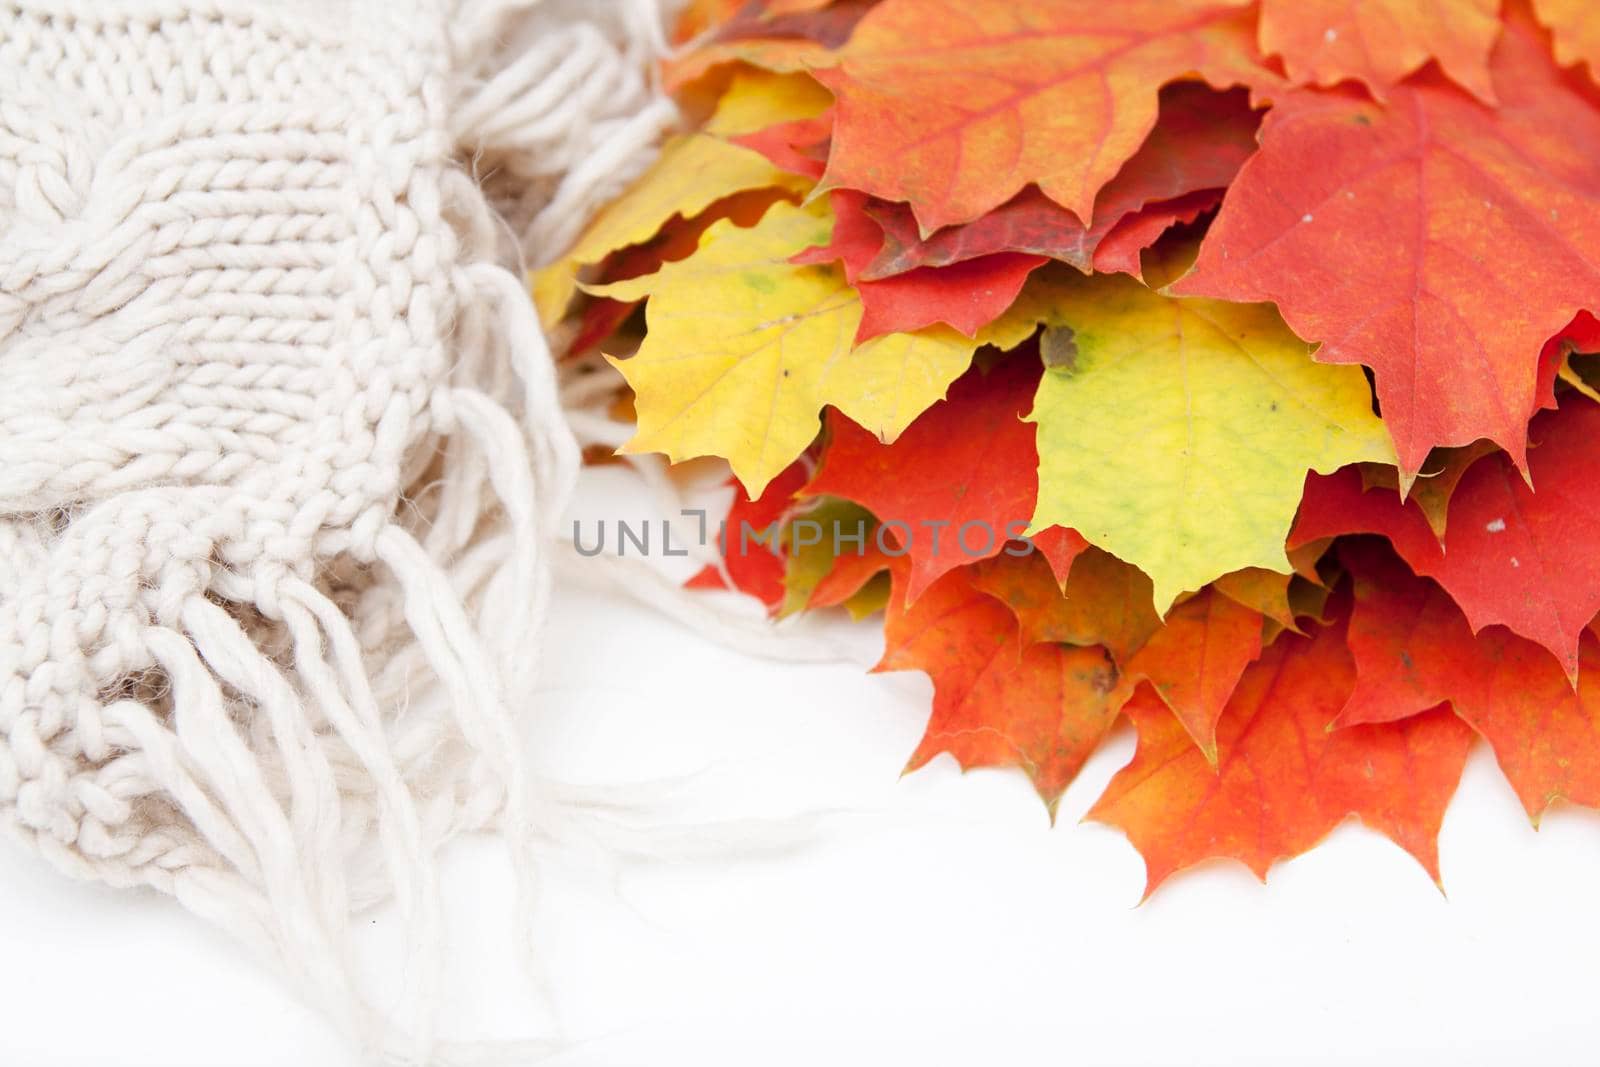 Autumn background of orange and red maple leaves on a white background